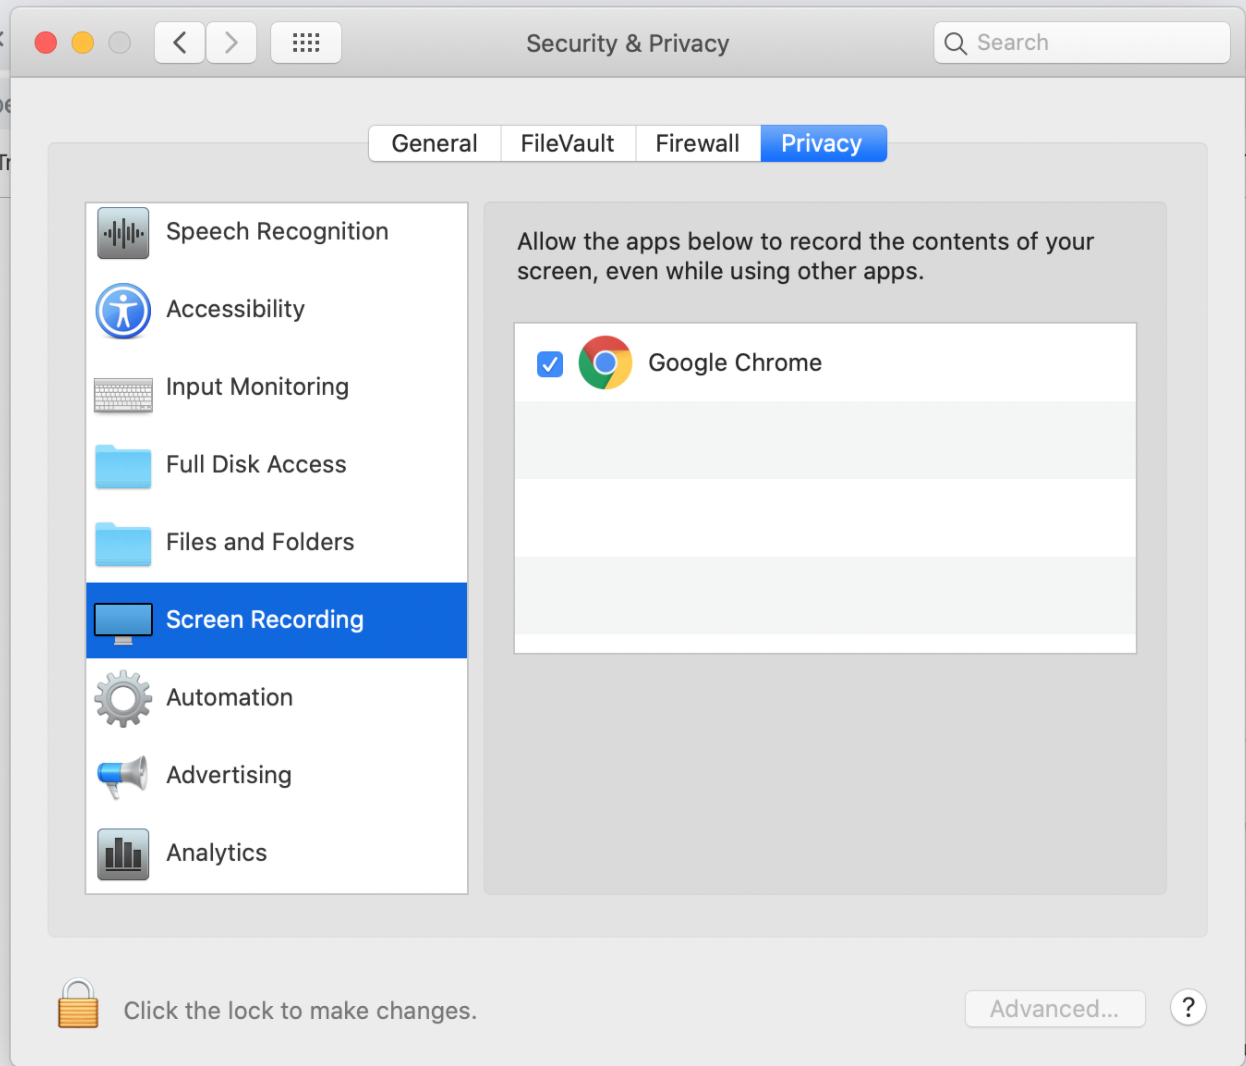 The Security & Privacy window on MacOS. In the left panel, 'Screen Recording' is selected. In the right panel, 'Google Chrome' is checked.